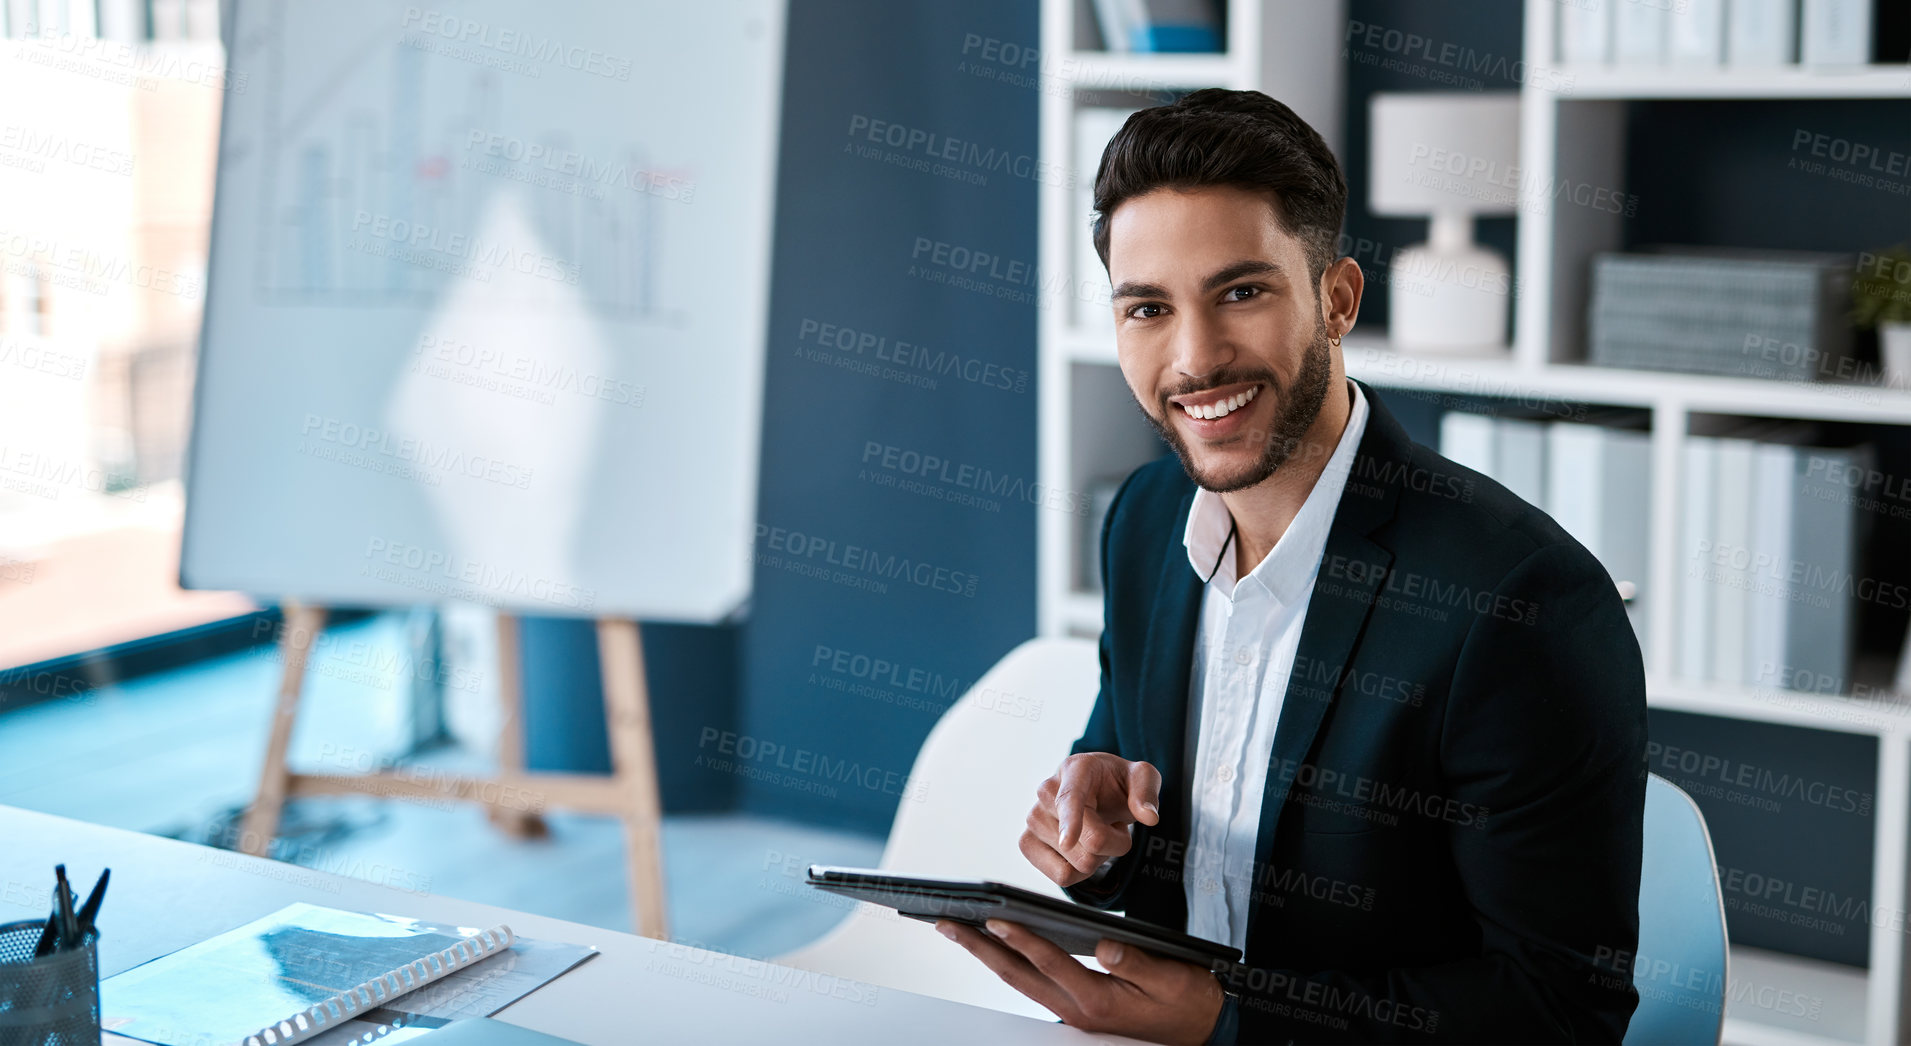 Buy stock photo Cropped portrait of a handsome young businessman sitting alone and using a tablet in his office